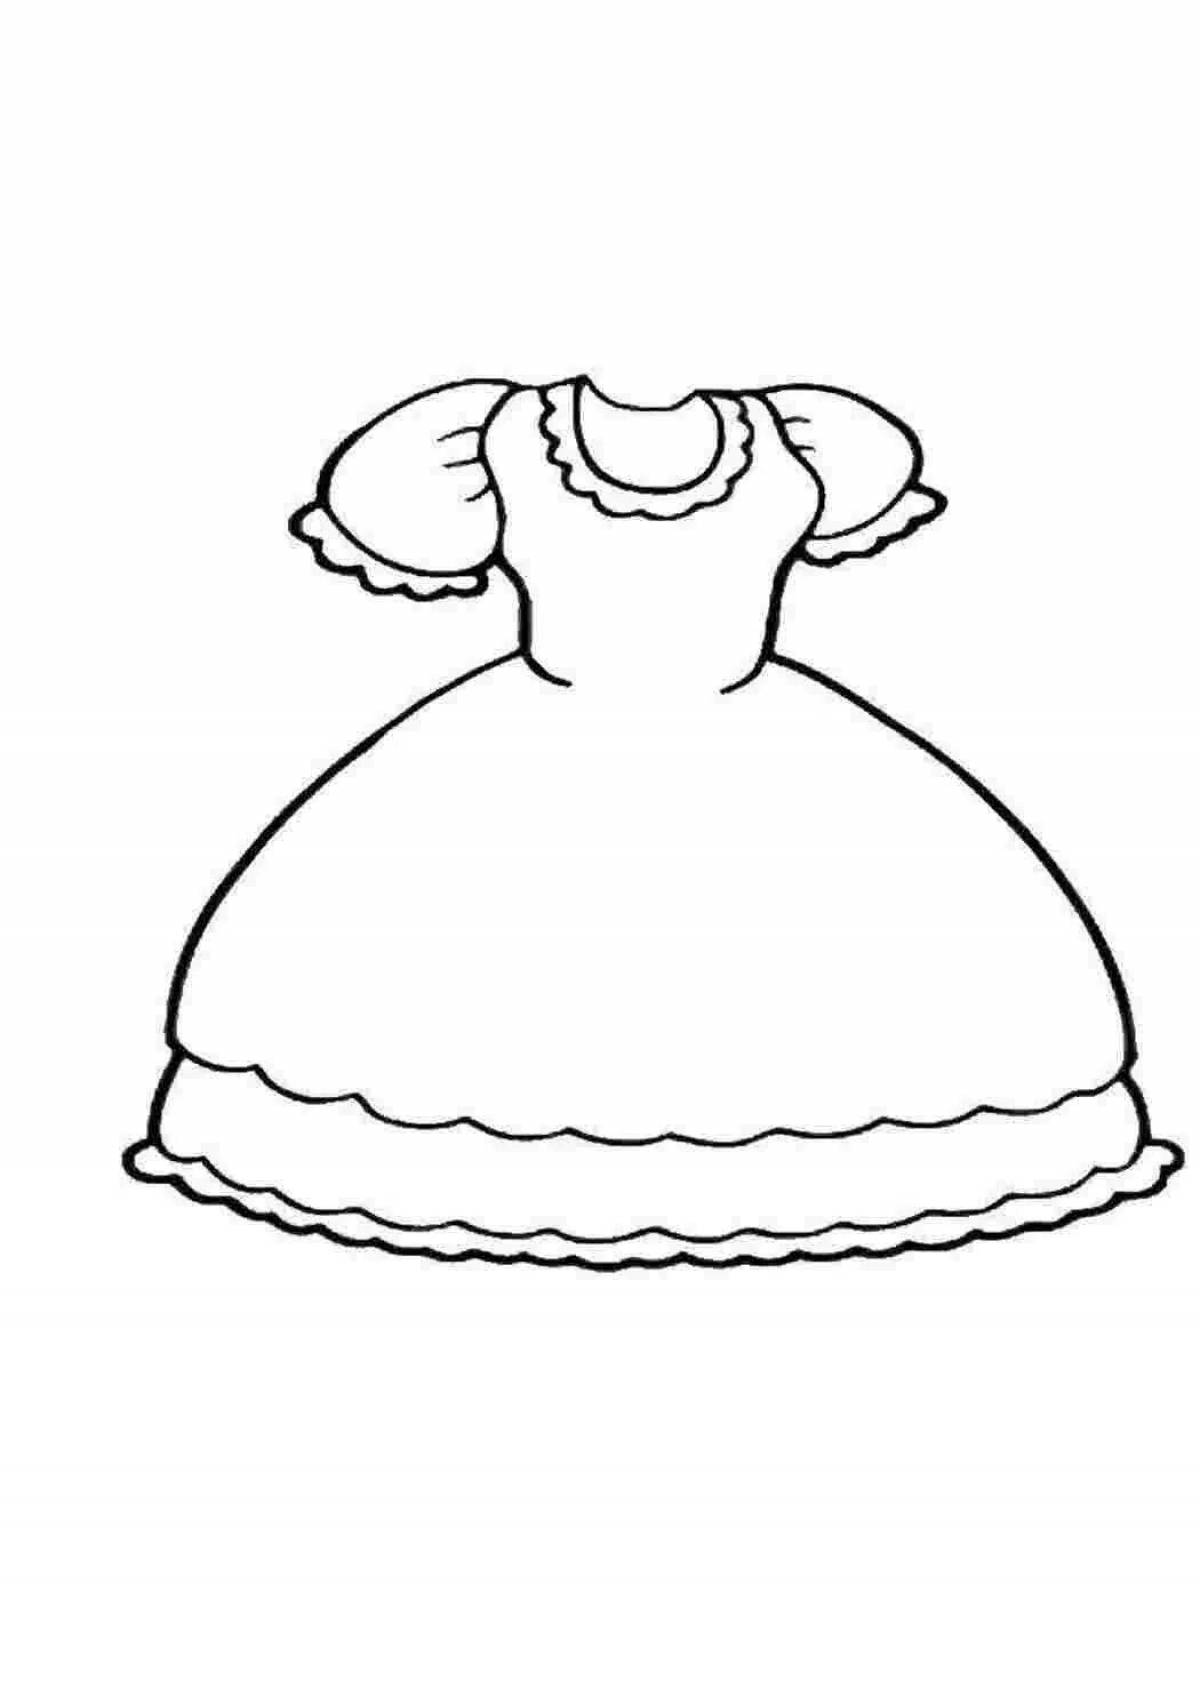 Coloring page joyful dress for children 2-3 years old